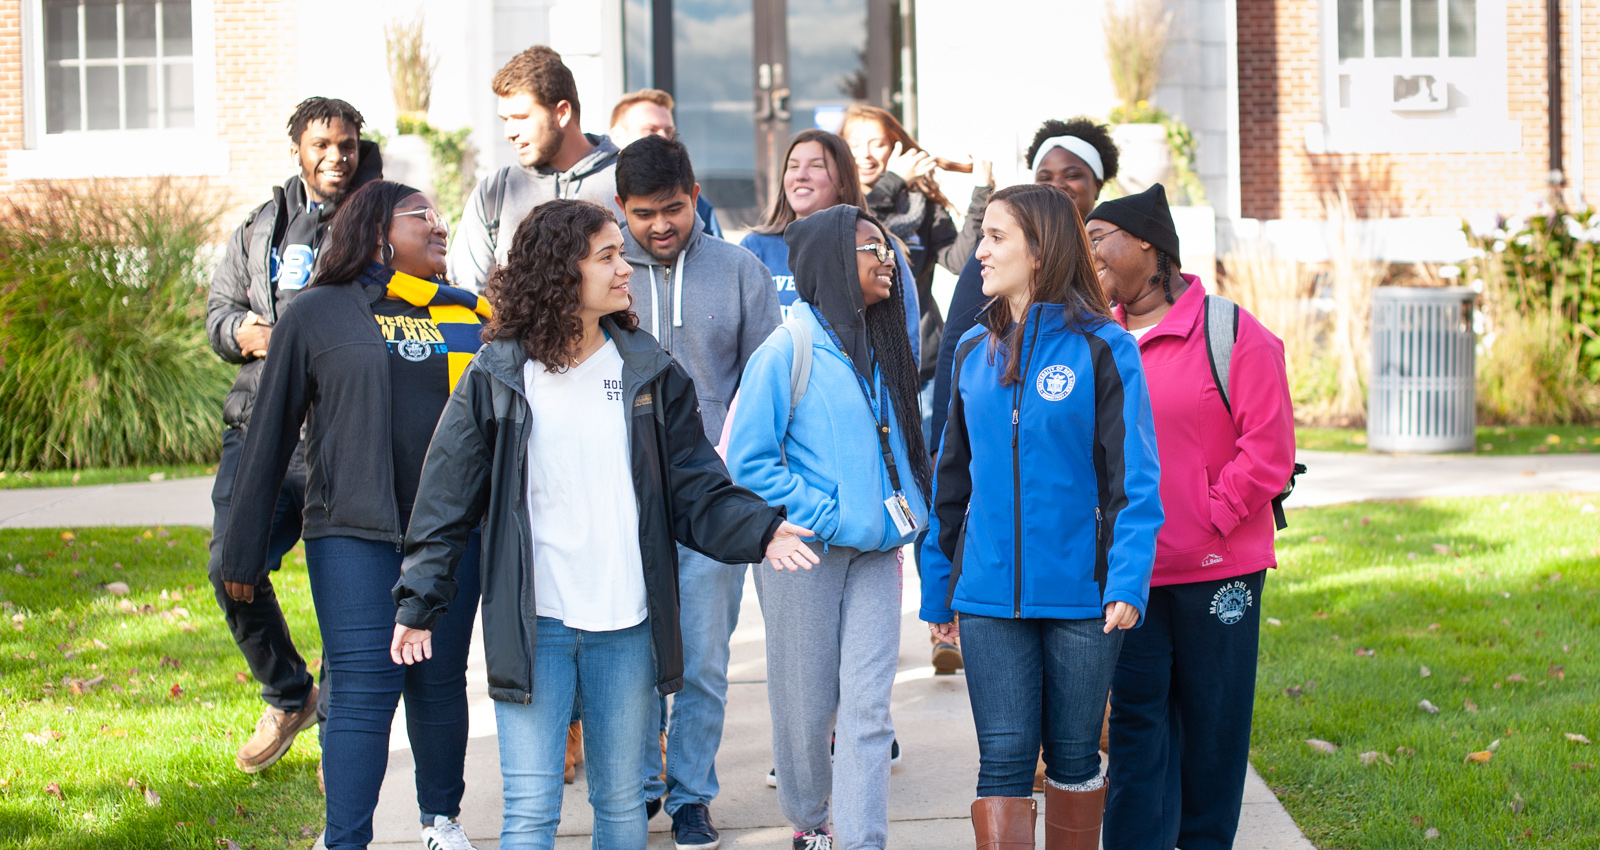 The University of New Haven welcomed nearly 300 new undergraduate and graduate students at the start of the spring semester.